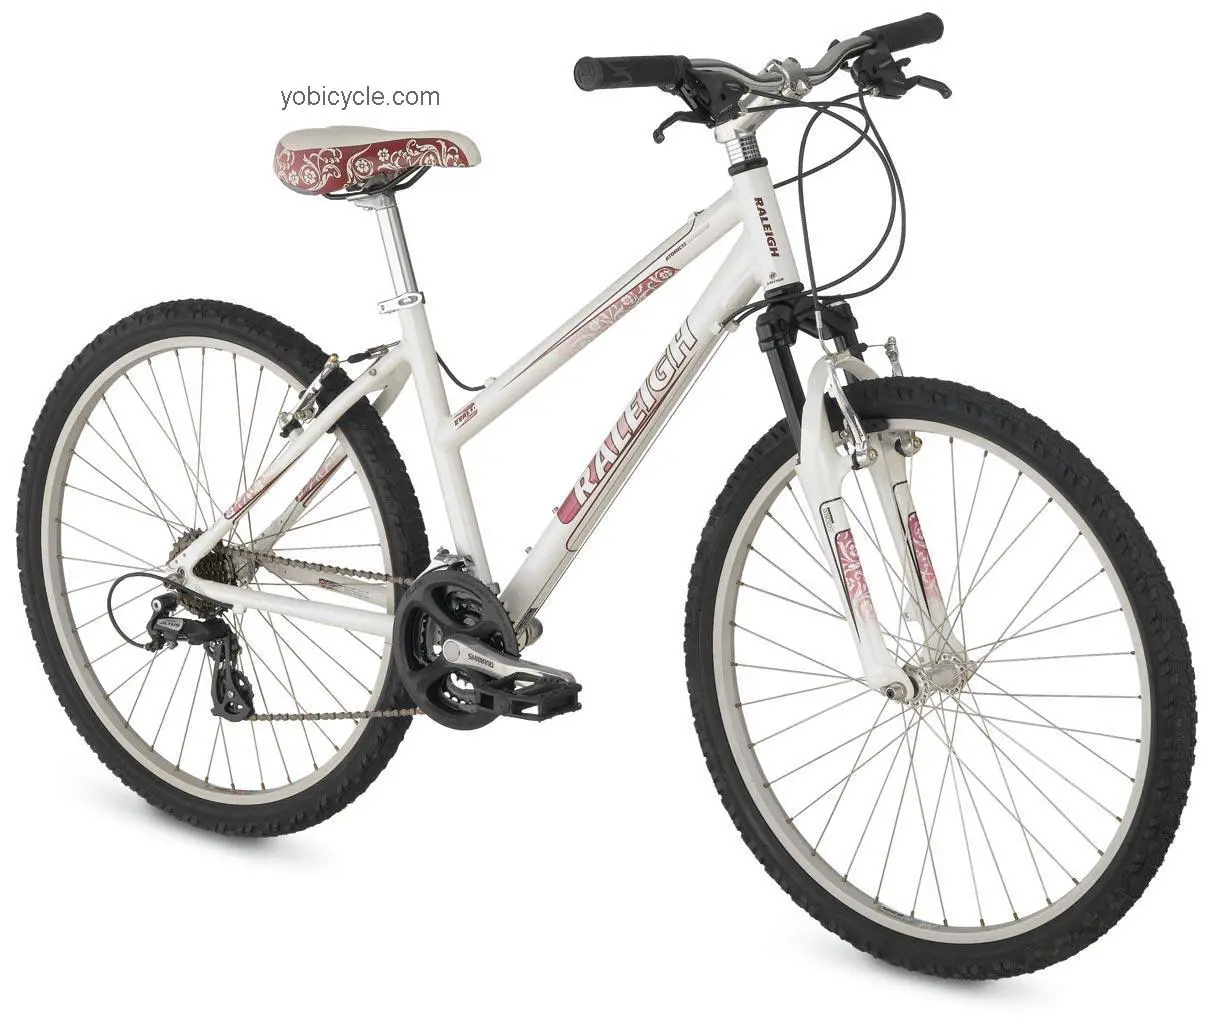 Raleigh Eva 3.0 2009 comparison online with competitors